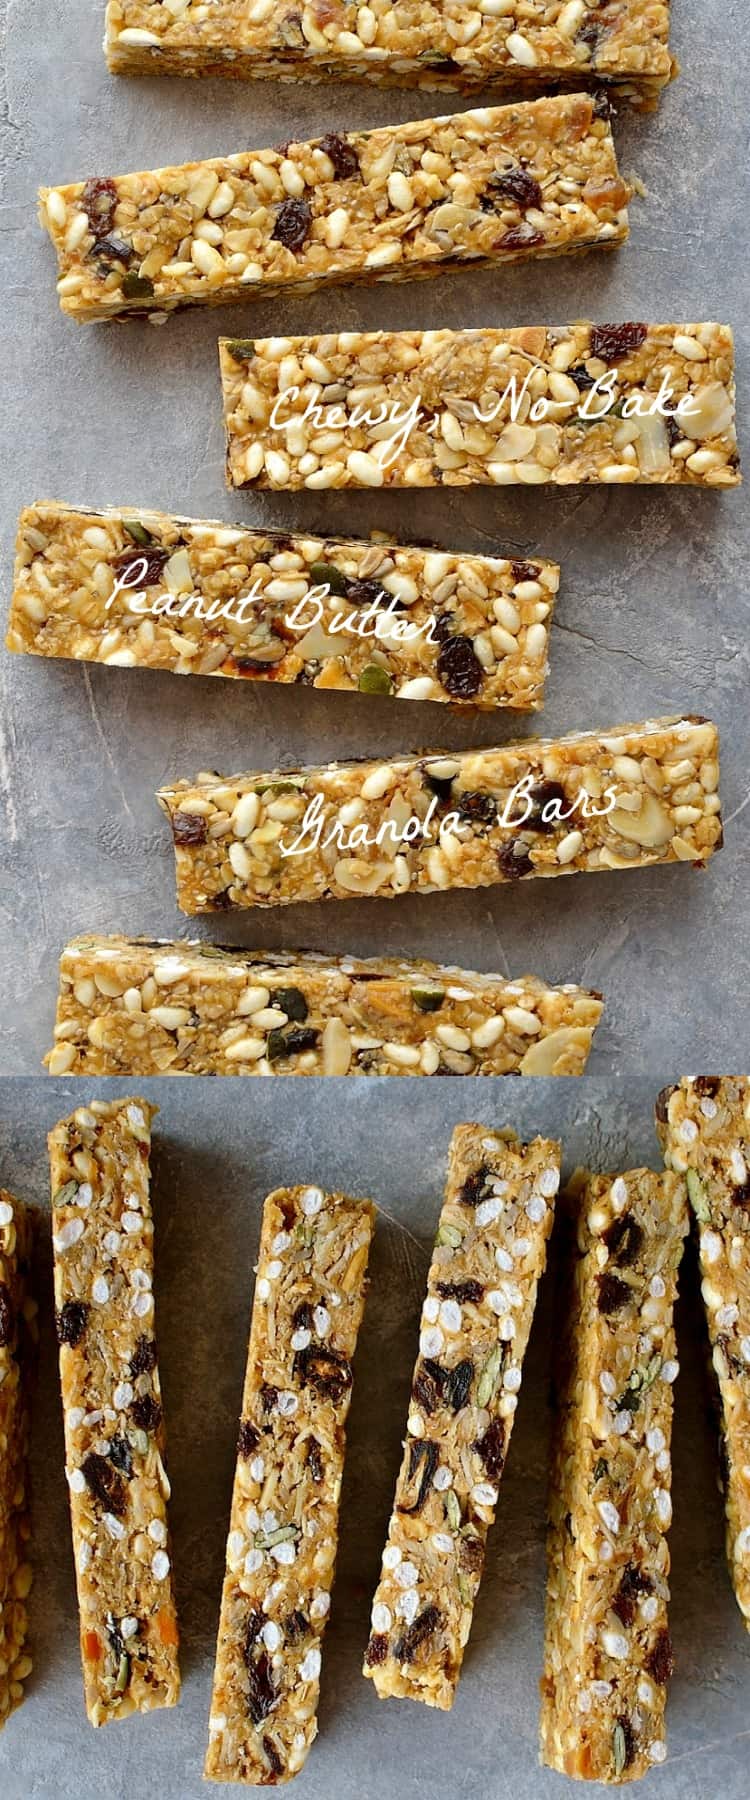 chewy, no-bake peanut butter granola bars - easy to make, versatile snack bars filled with oats, seeds, nuts and dried fruit.